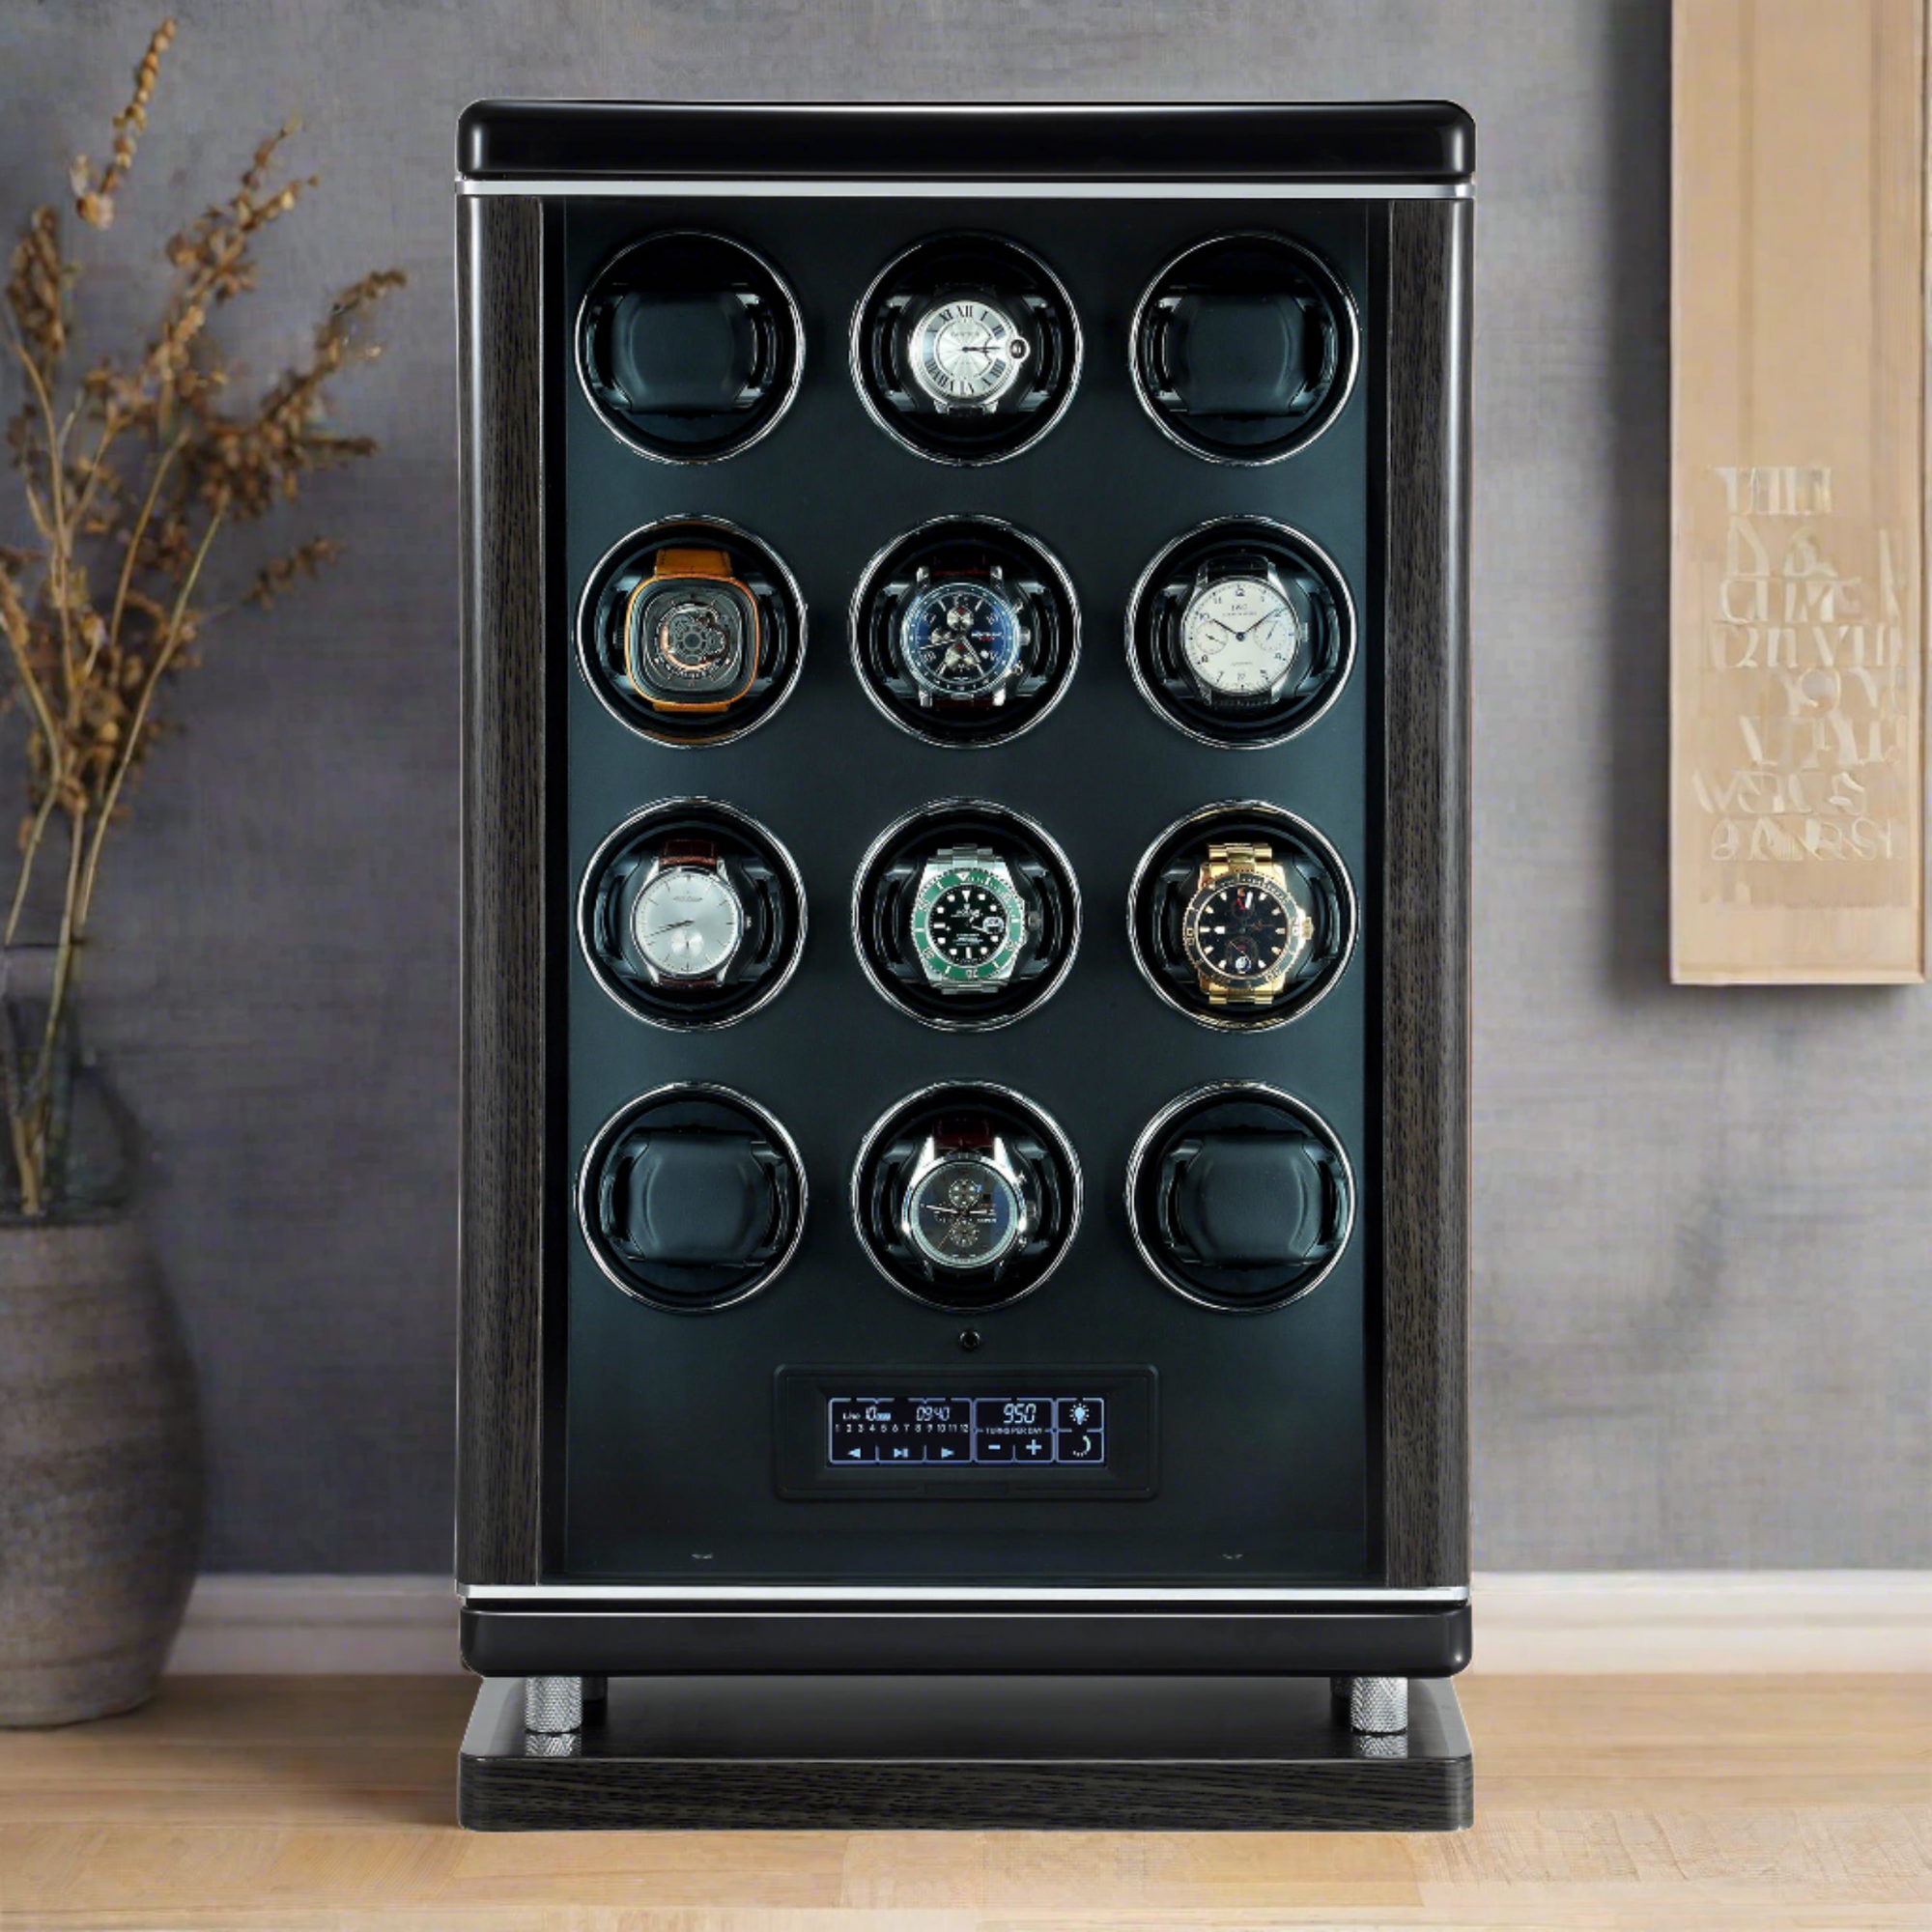 12 Watch Winder for Automatic Watches with BioMetric Technology by Tempus